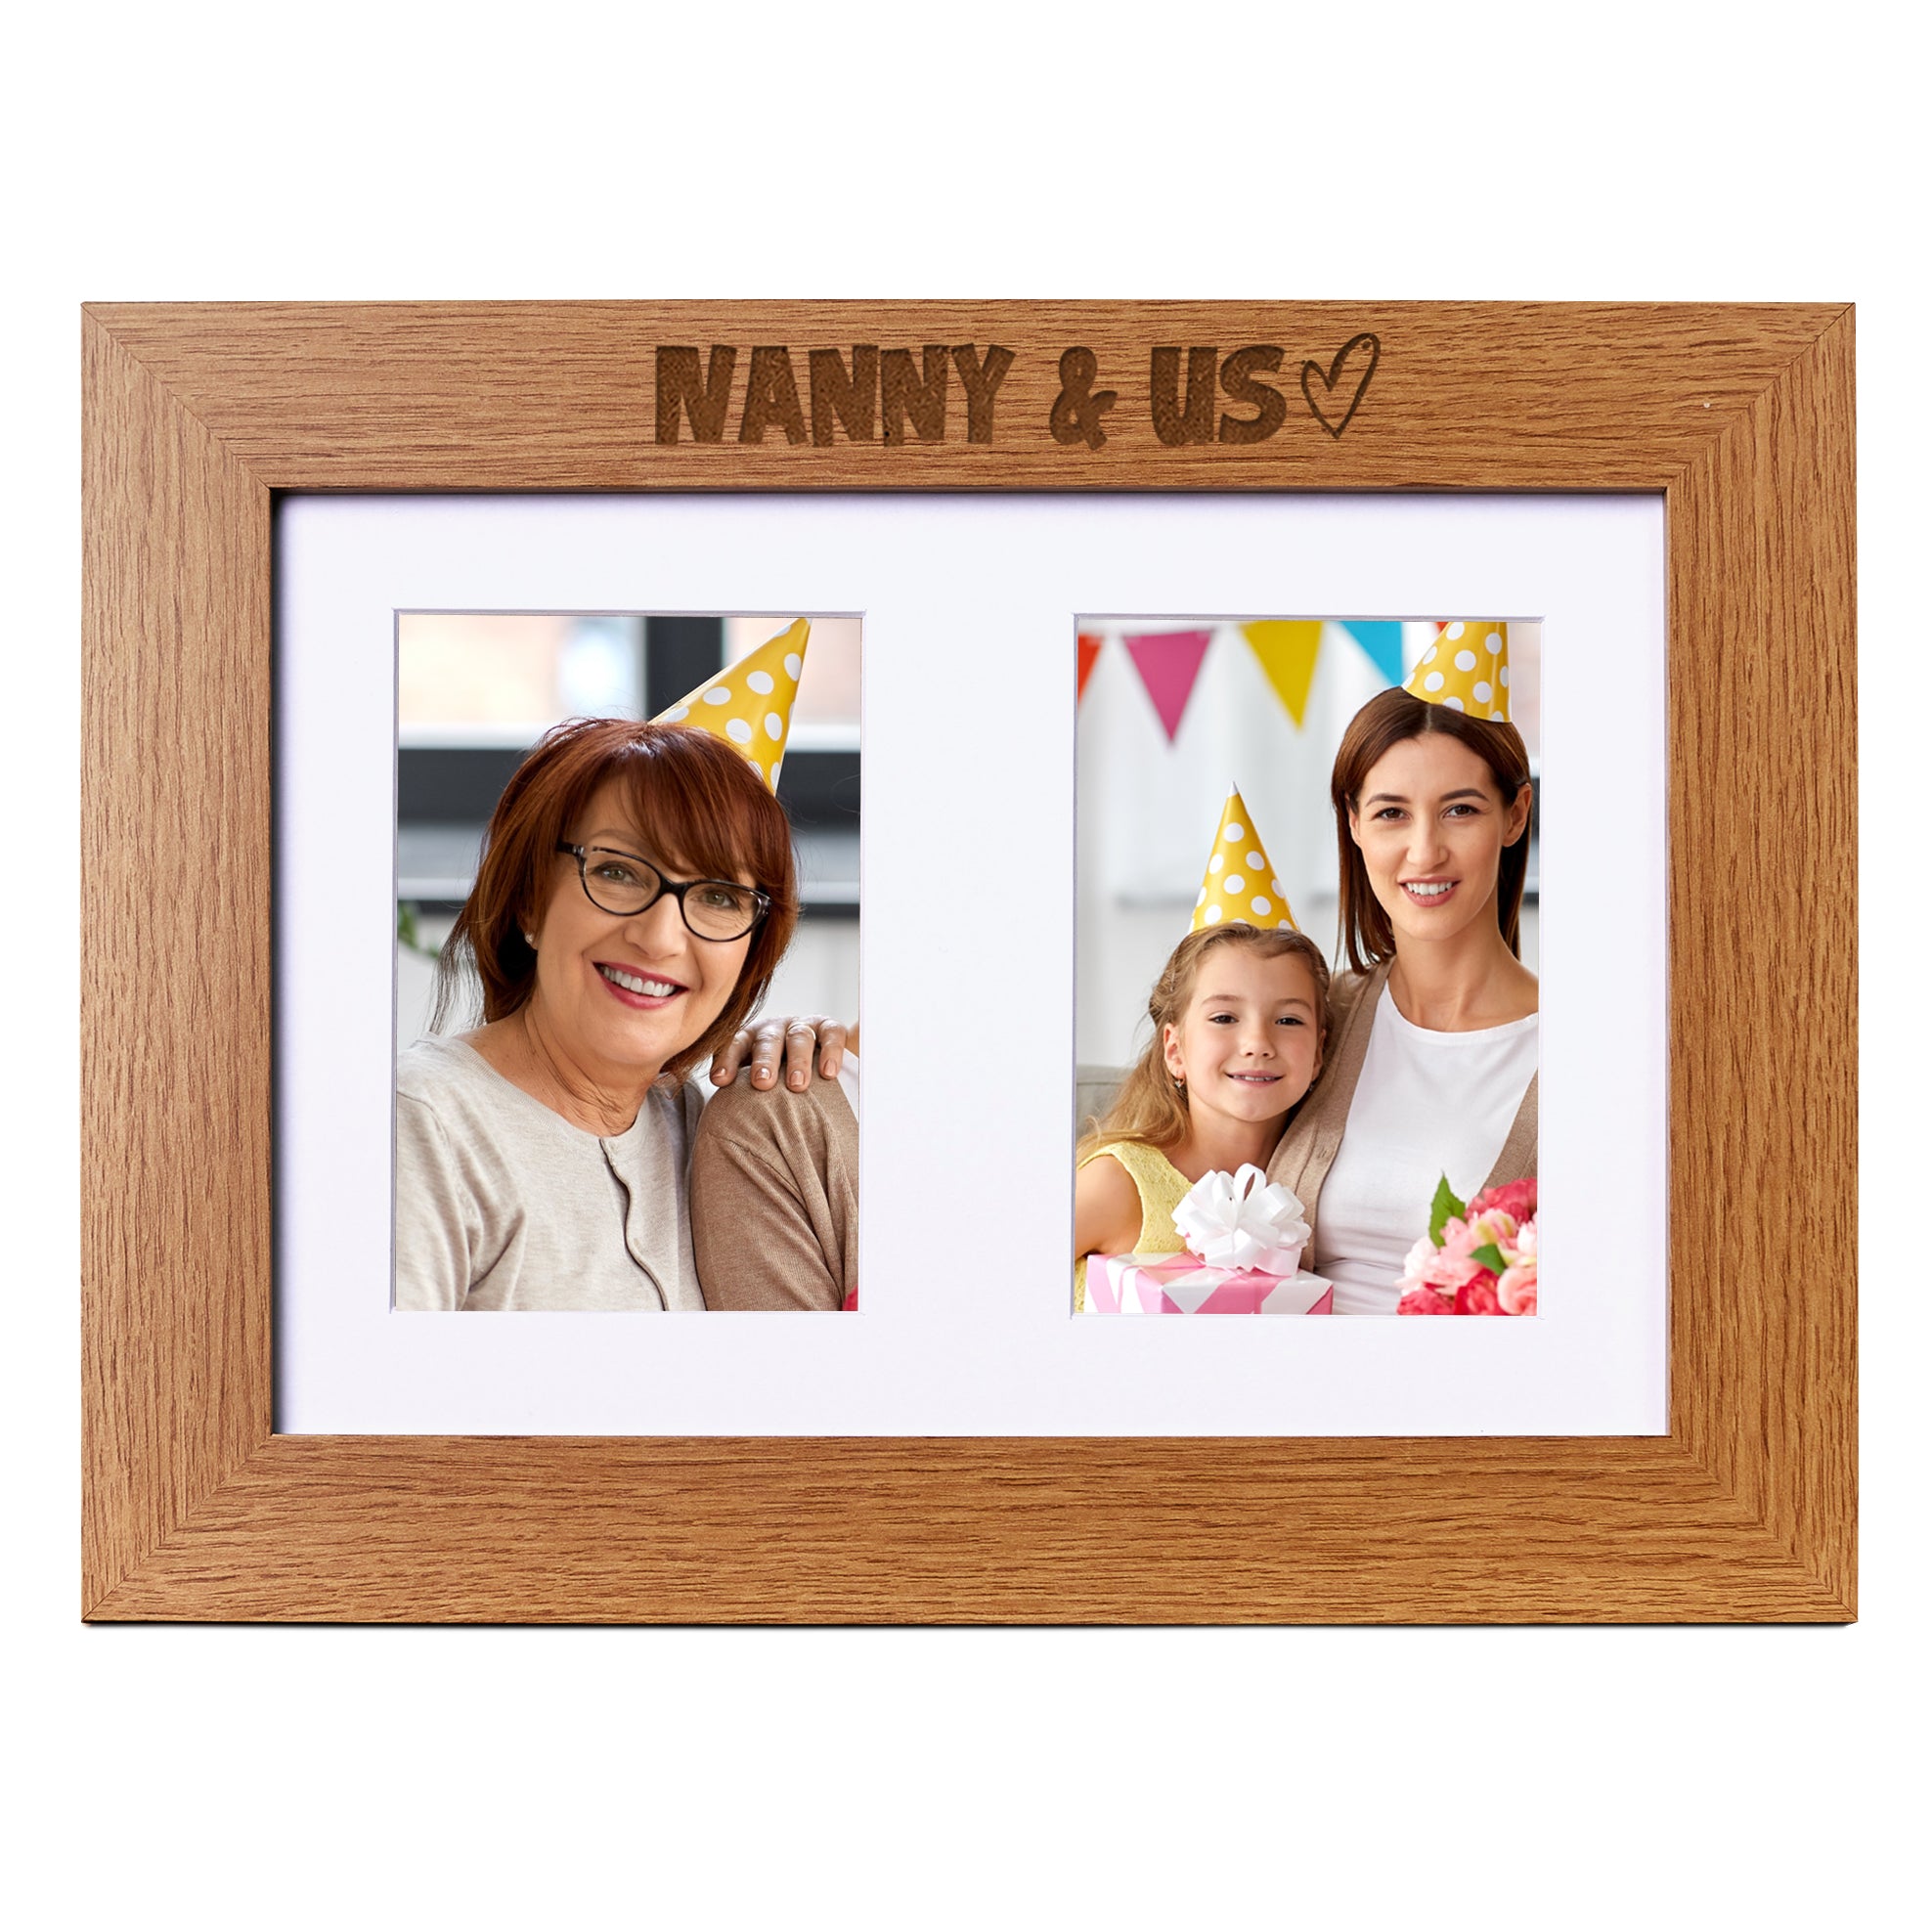 Nanny and Us Photo Picture Frame Double 6x4 Inch